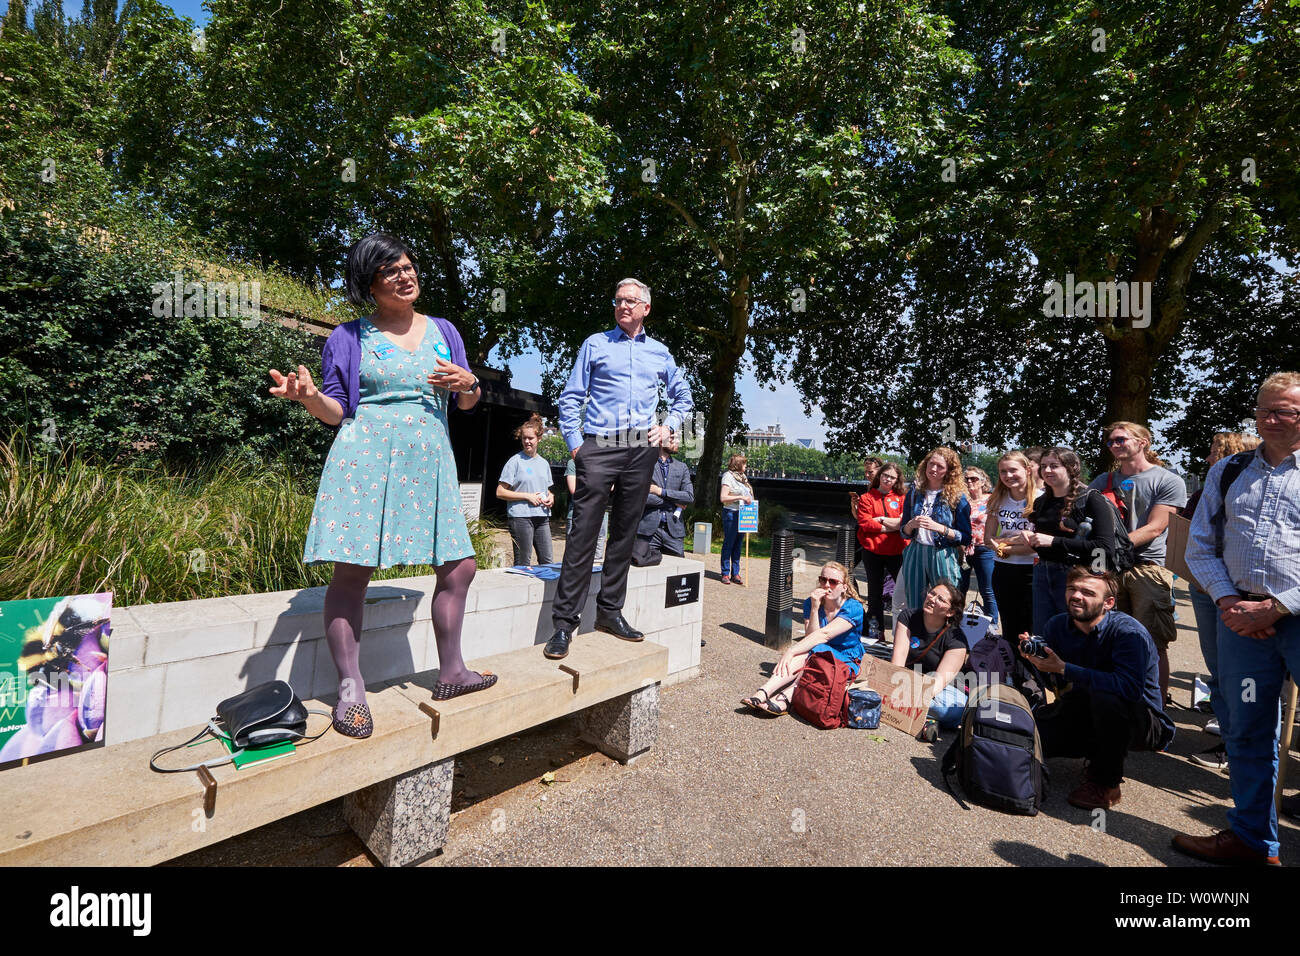 Global Strike For Climate Lobby June 2019 - Bristol MP Thangam Debbonaire answers questions from the public on climate change, aviation and labour's stance on Brexit, Houses of Parliament near Black Rod's Garden and Palace of Westminster Stock Photo